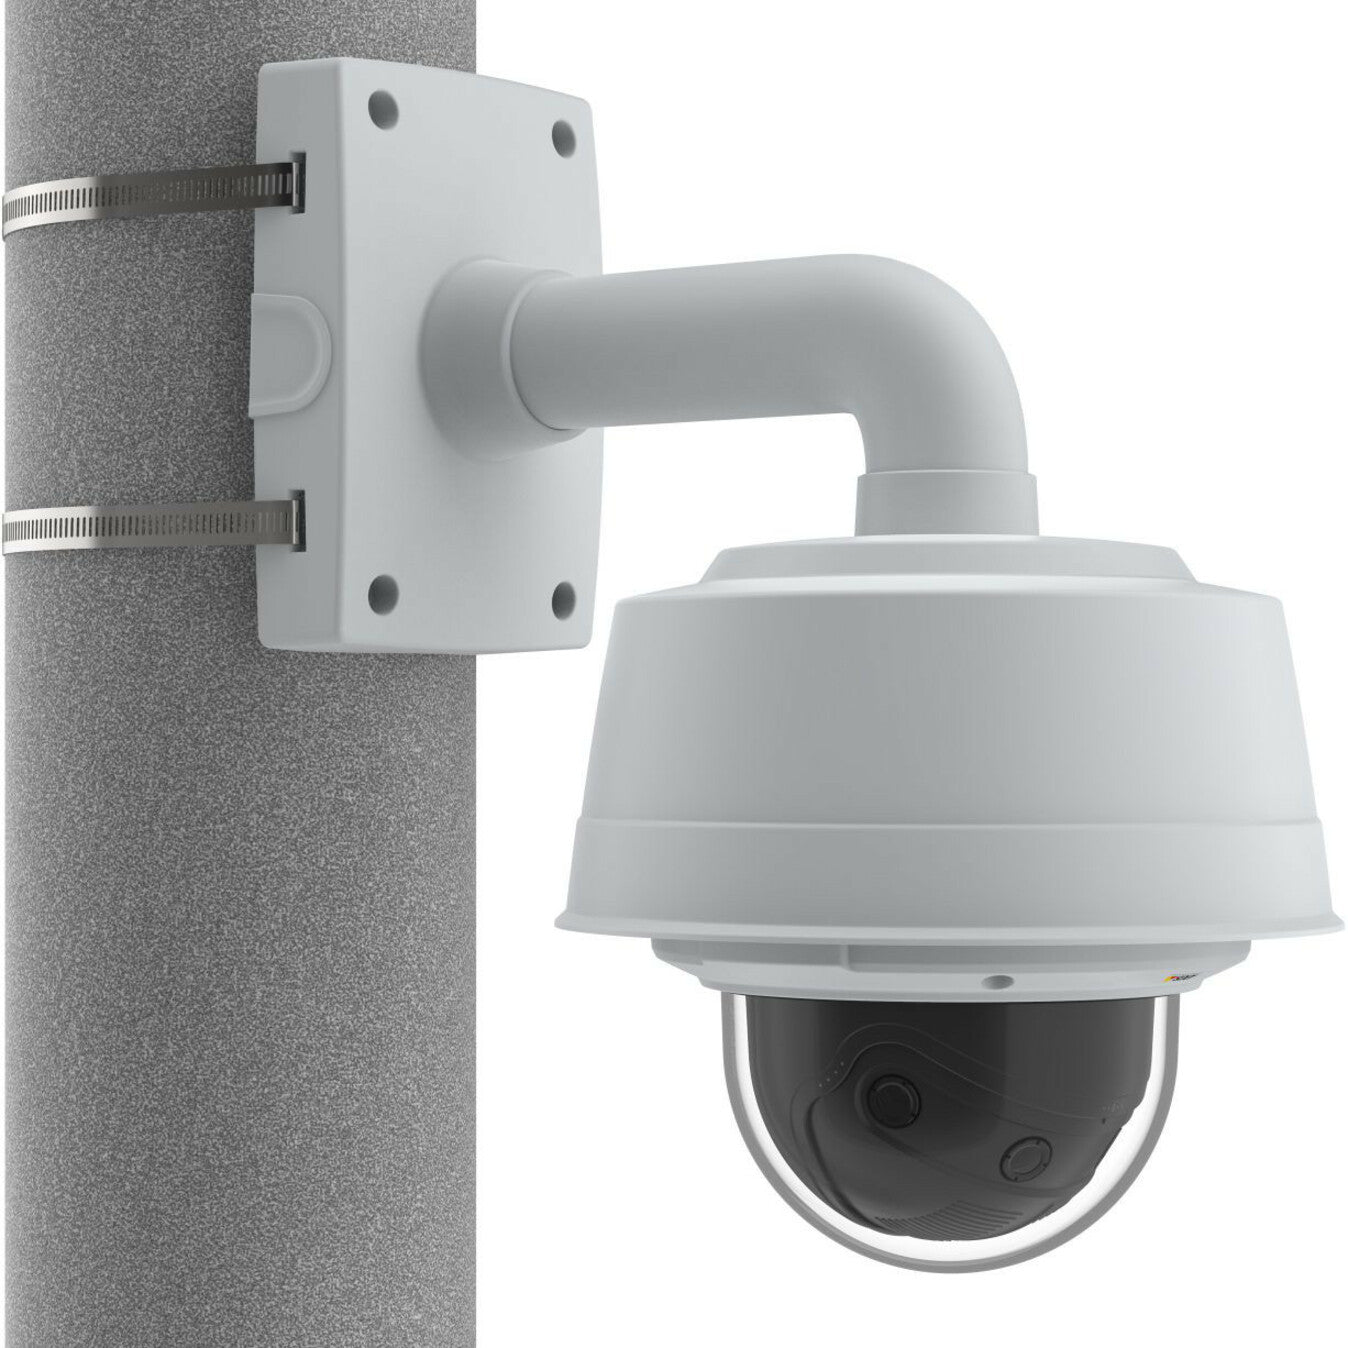 AXIS 01473-001 T91B67 Pole Mount, White - Securely Mount Your Network Camera